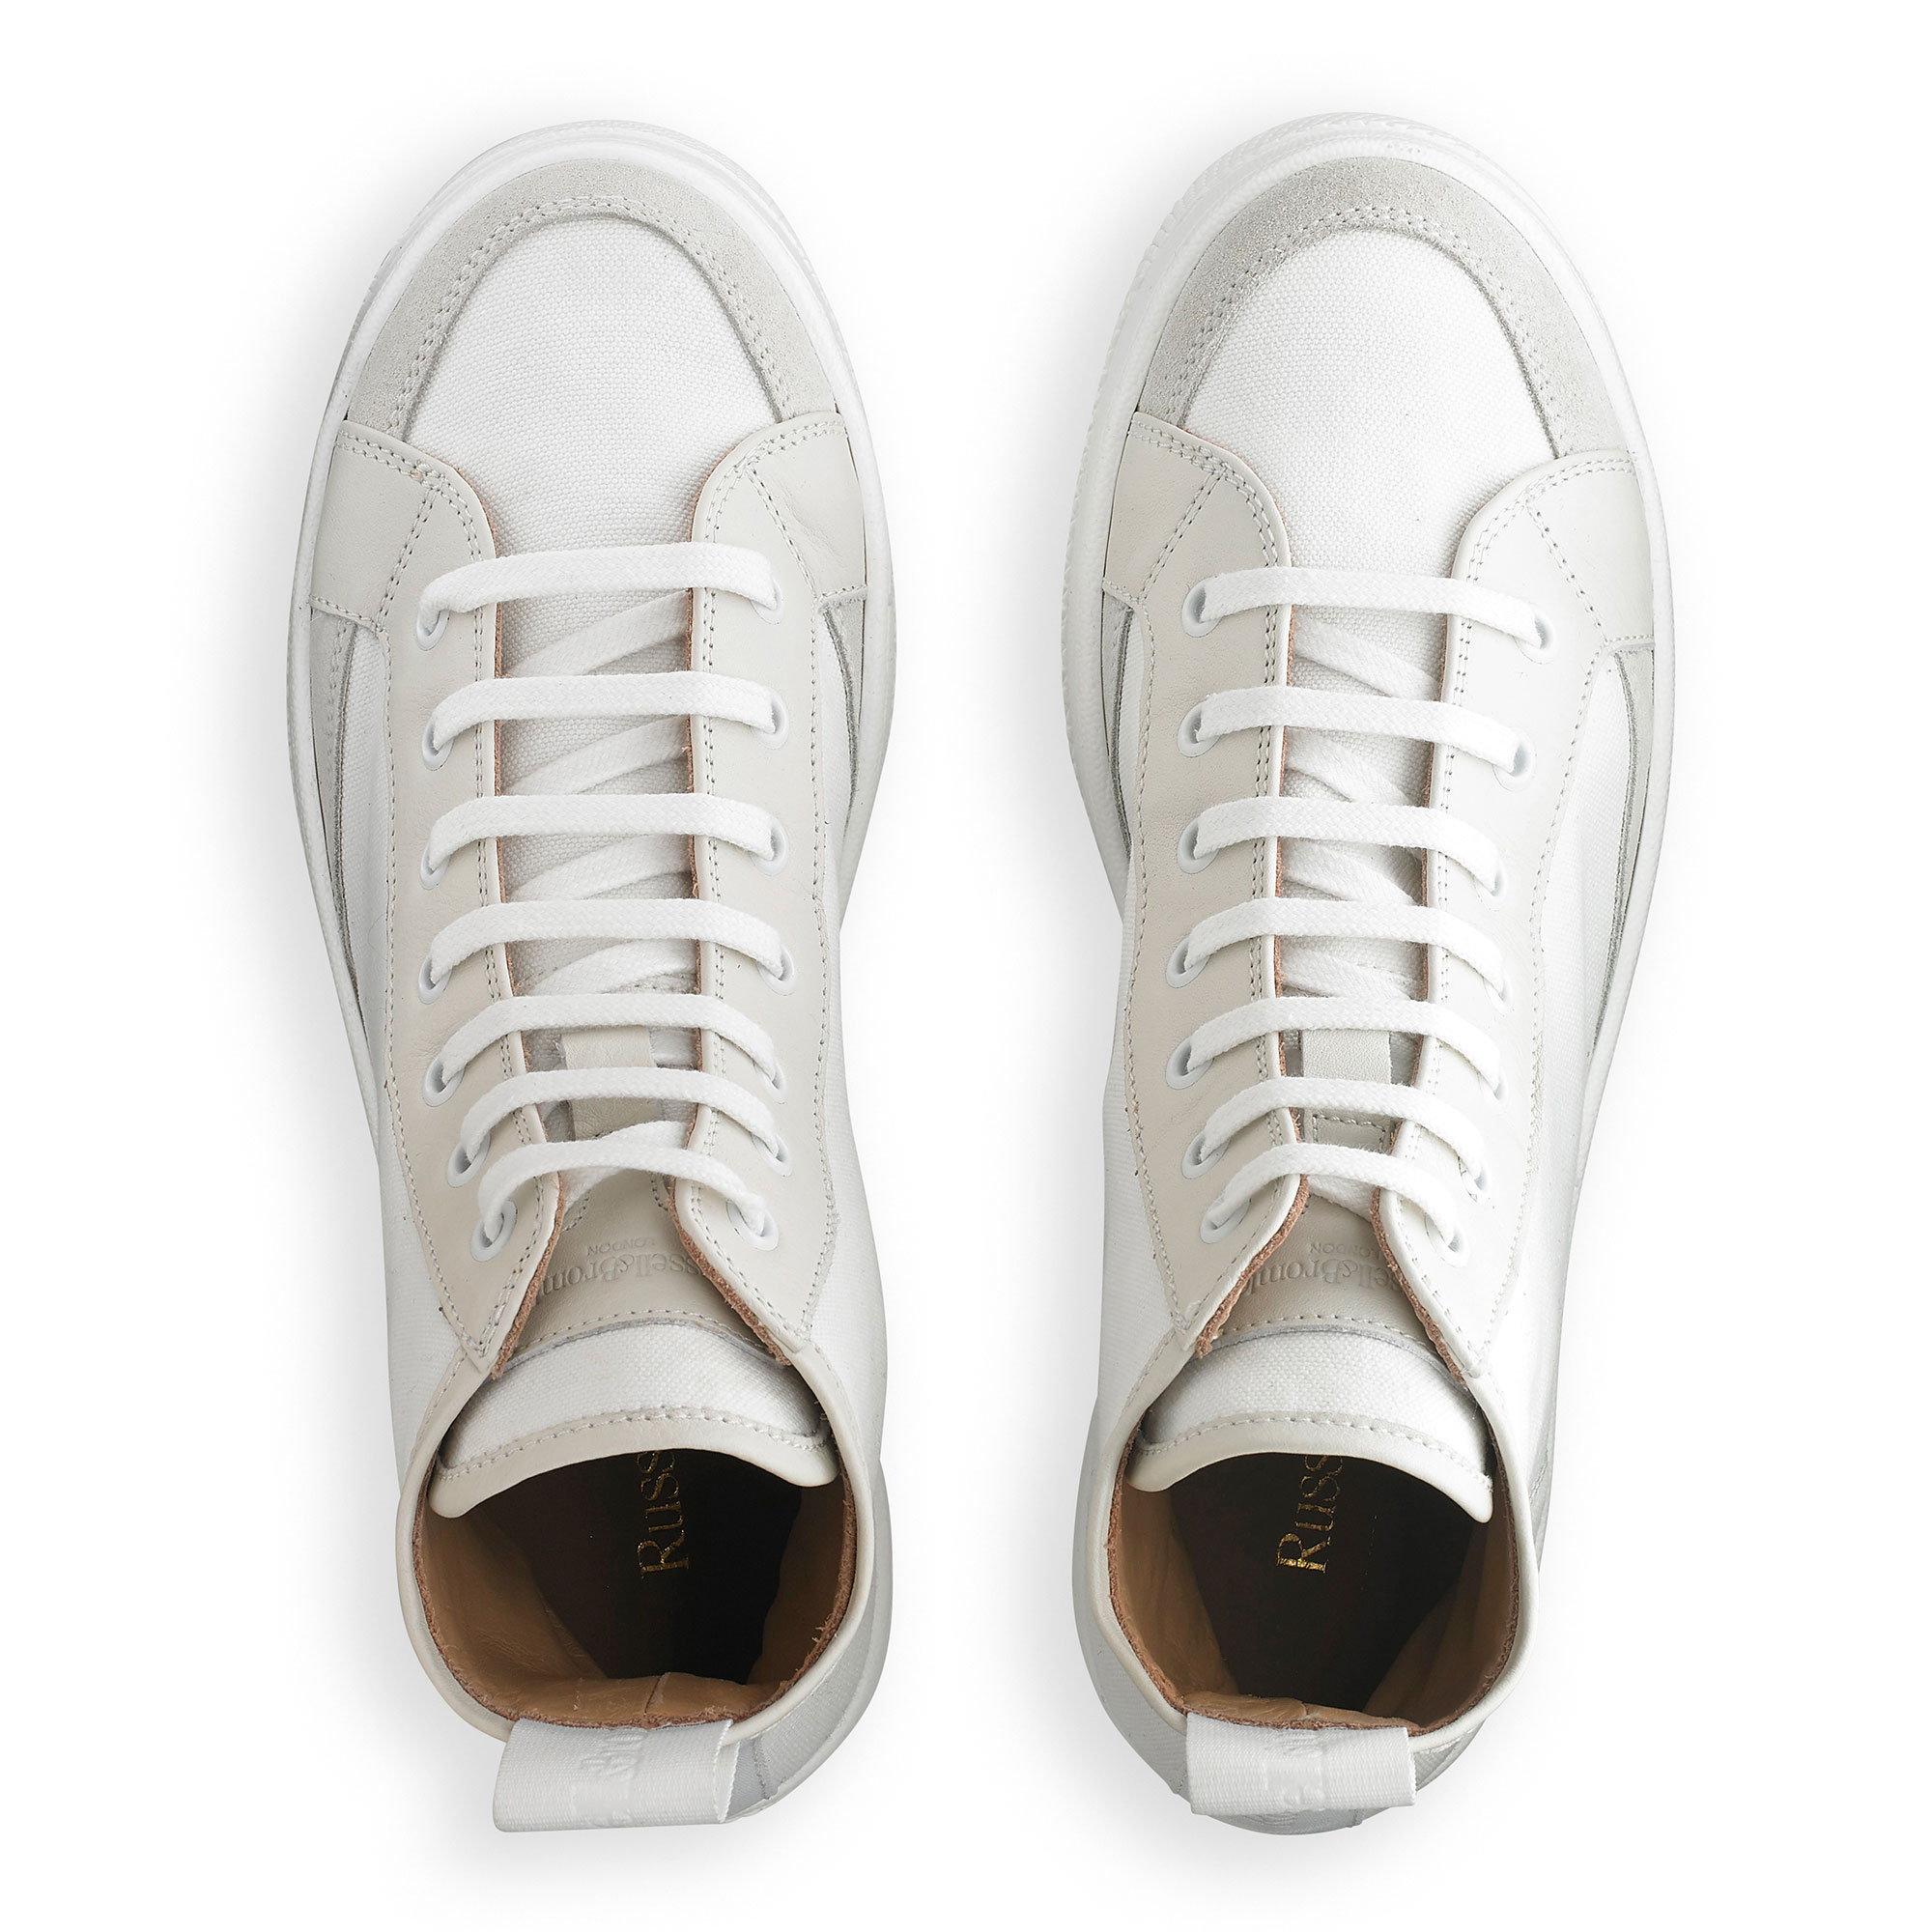 HOMERUN High-Top Sneaker in White Canvas | Russell & Bromley